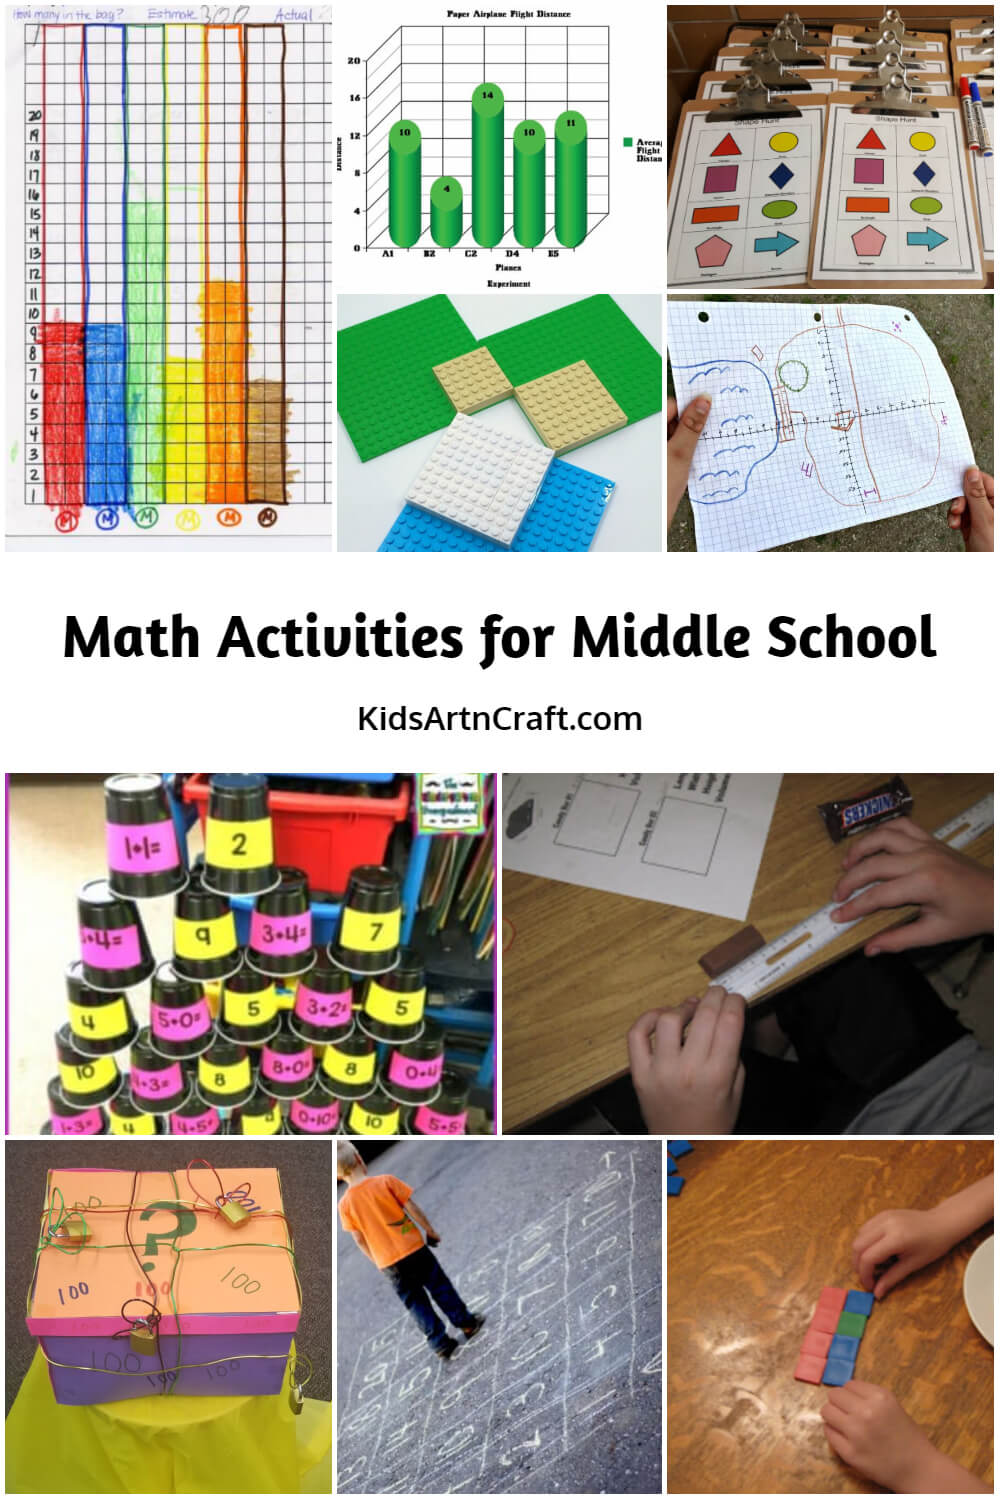 Math Activities for Middle School